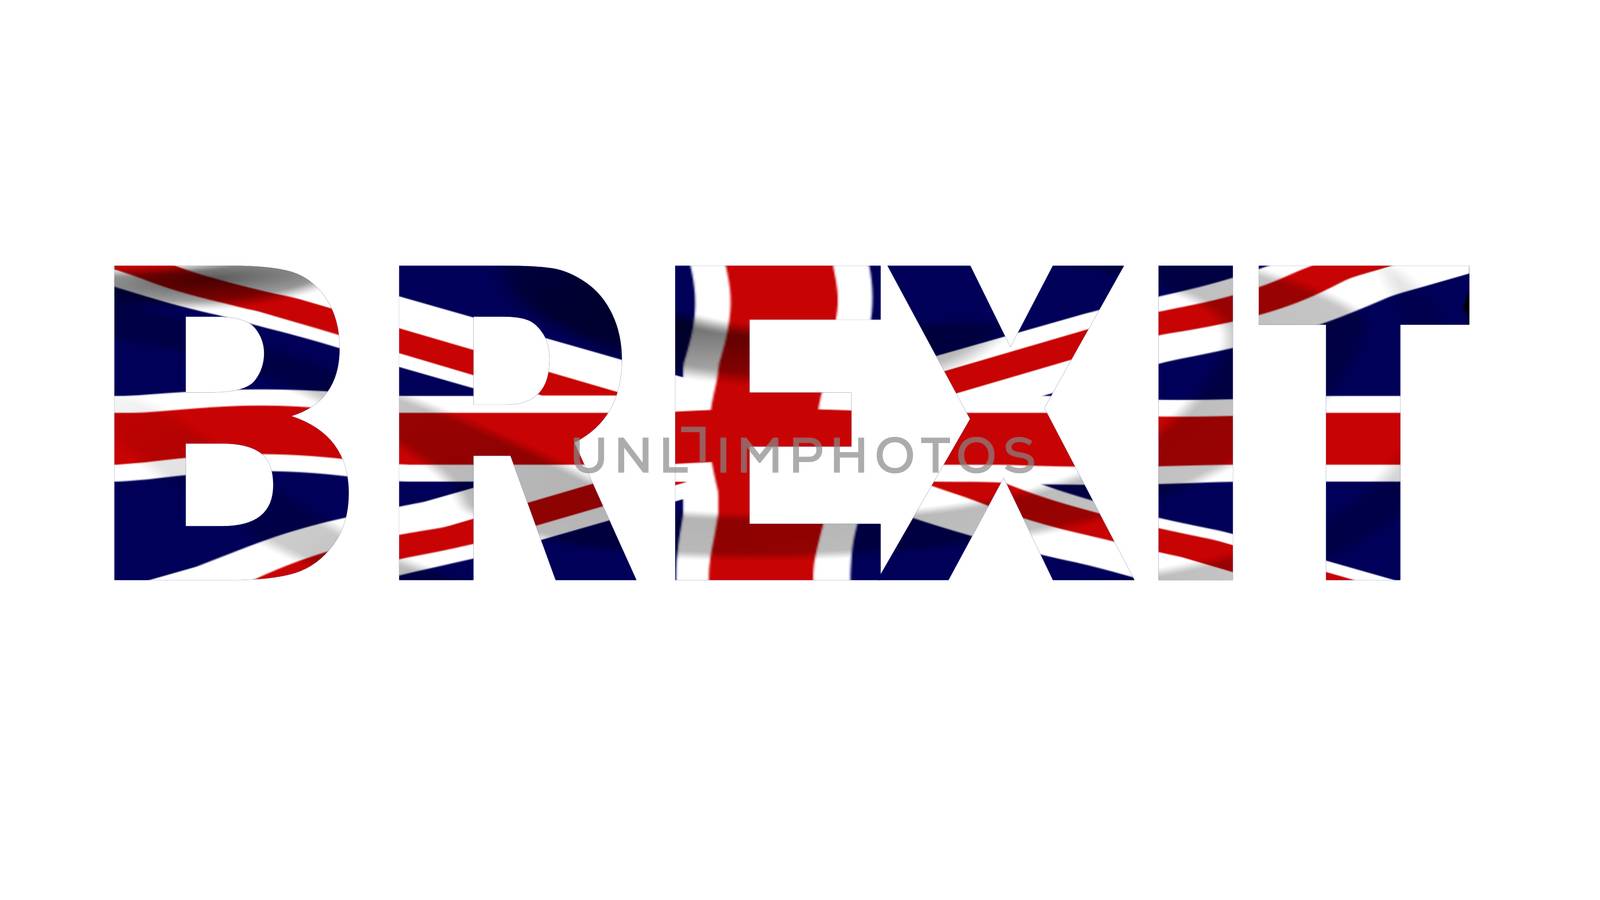 Brexit text in the colours of the Union Jack flag by magicbones